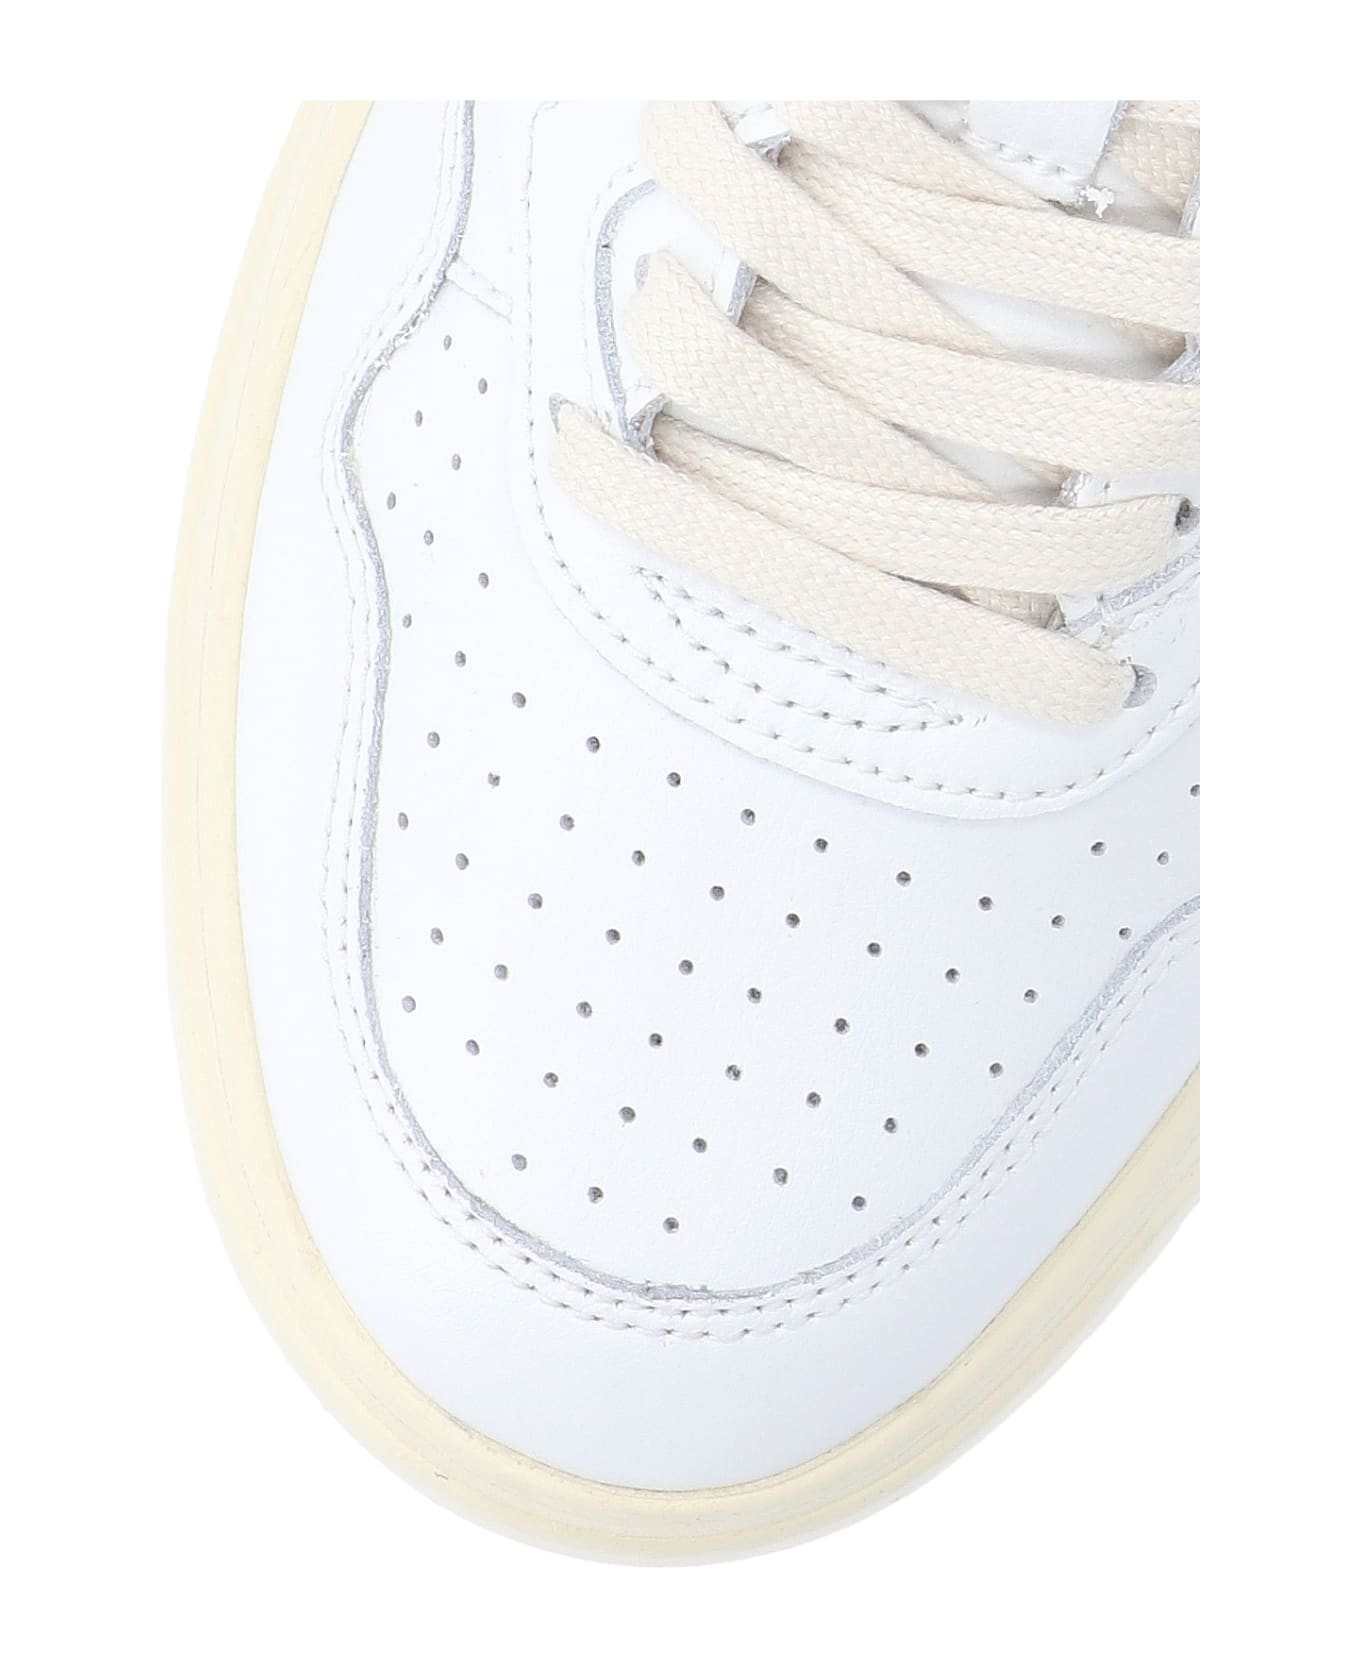 Autry Medalist Low Sneakers In White And Black Leather - Bianco